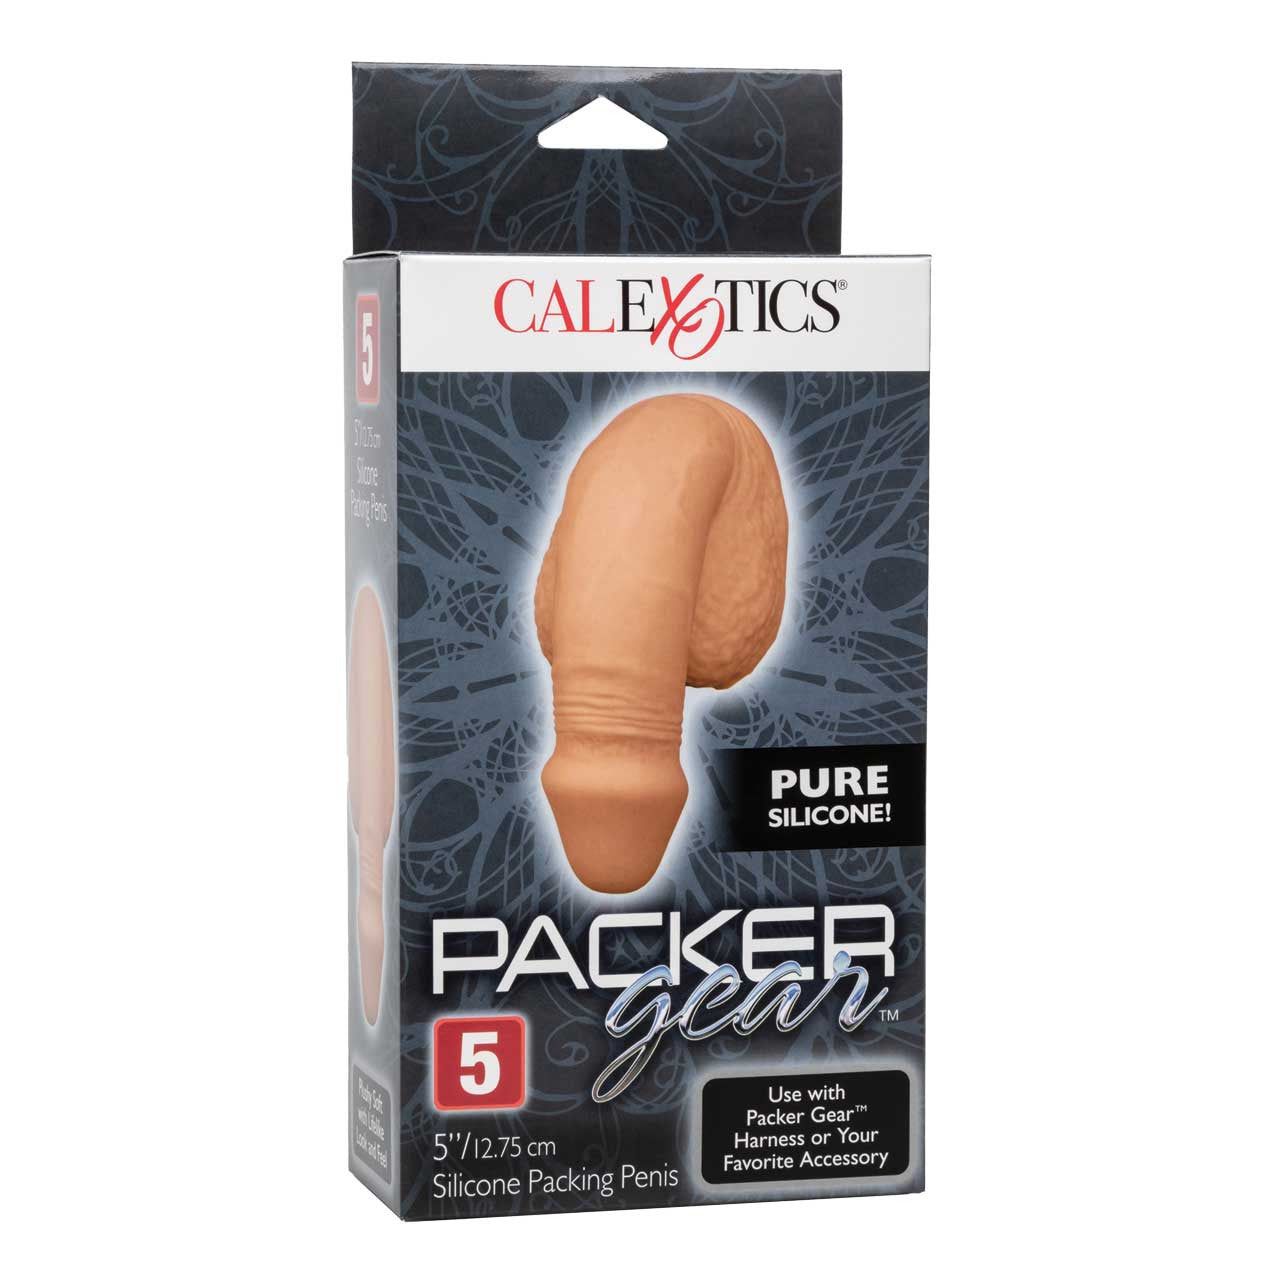 Packing Penis 5"/12.75 cm Silicone